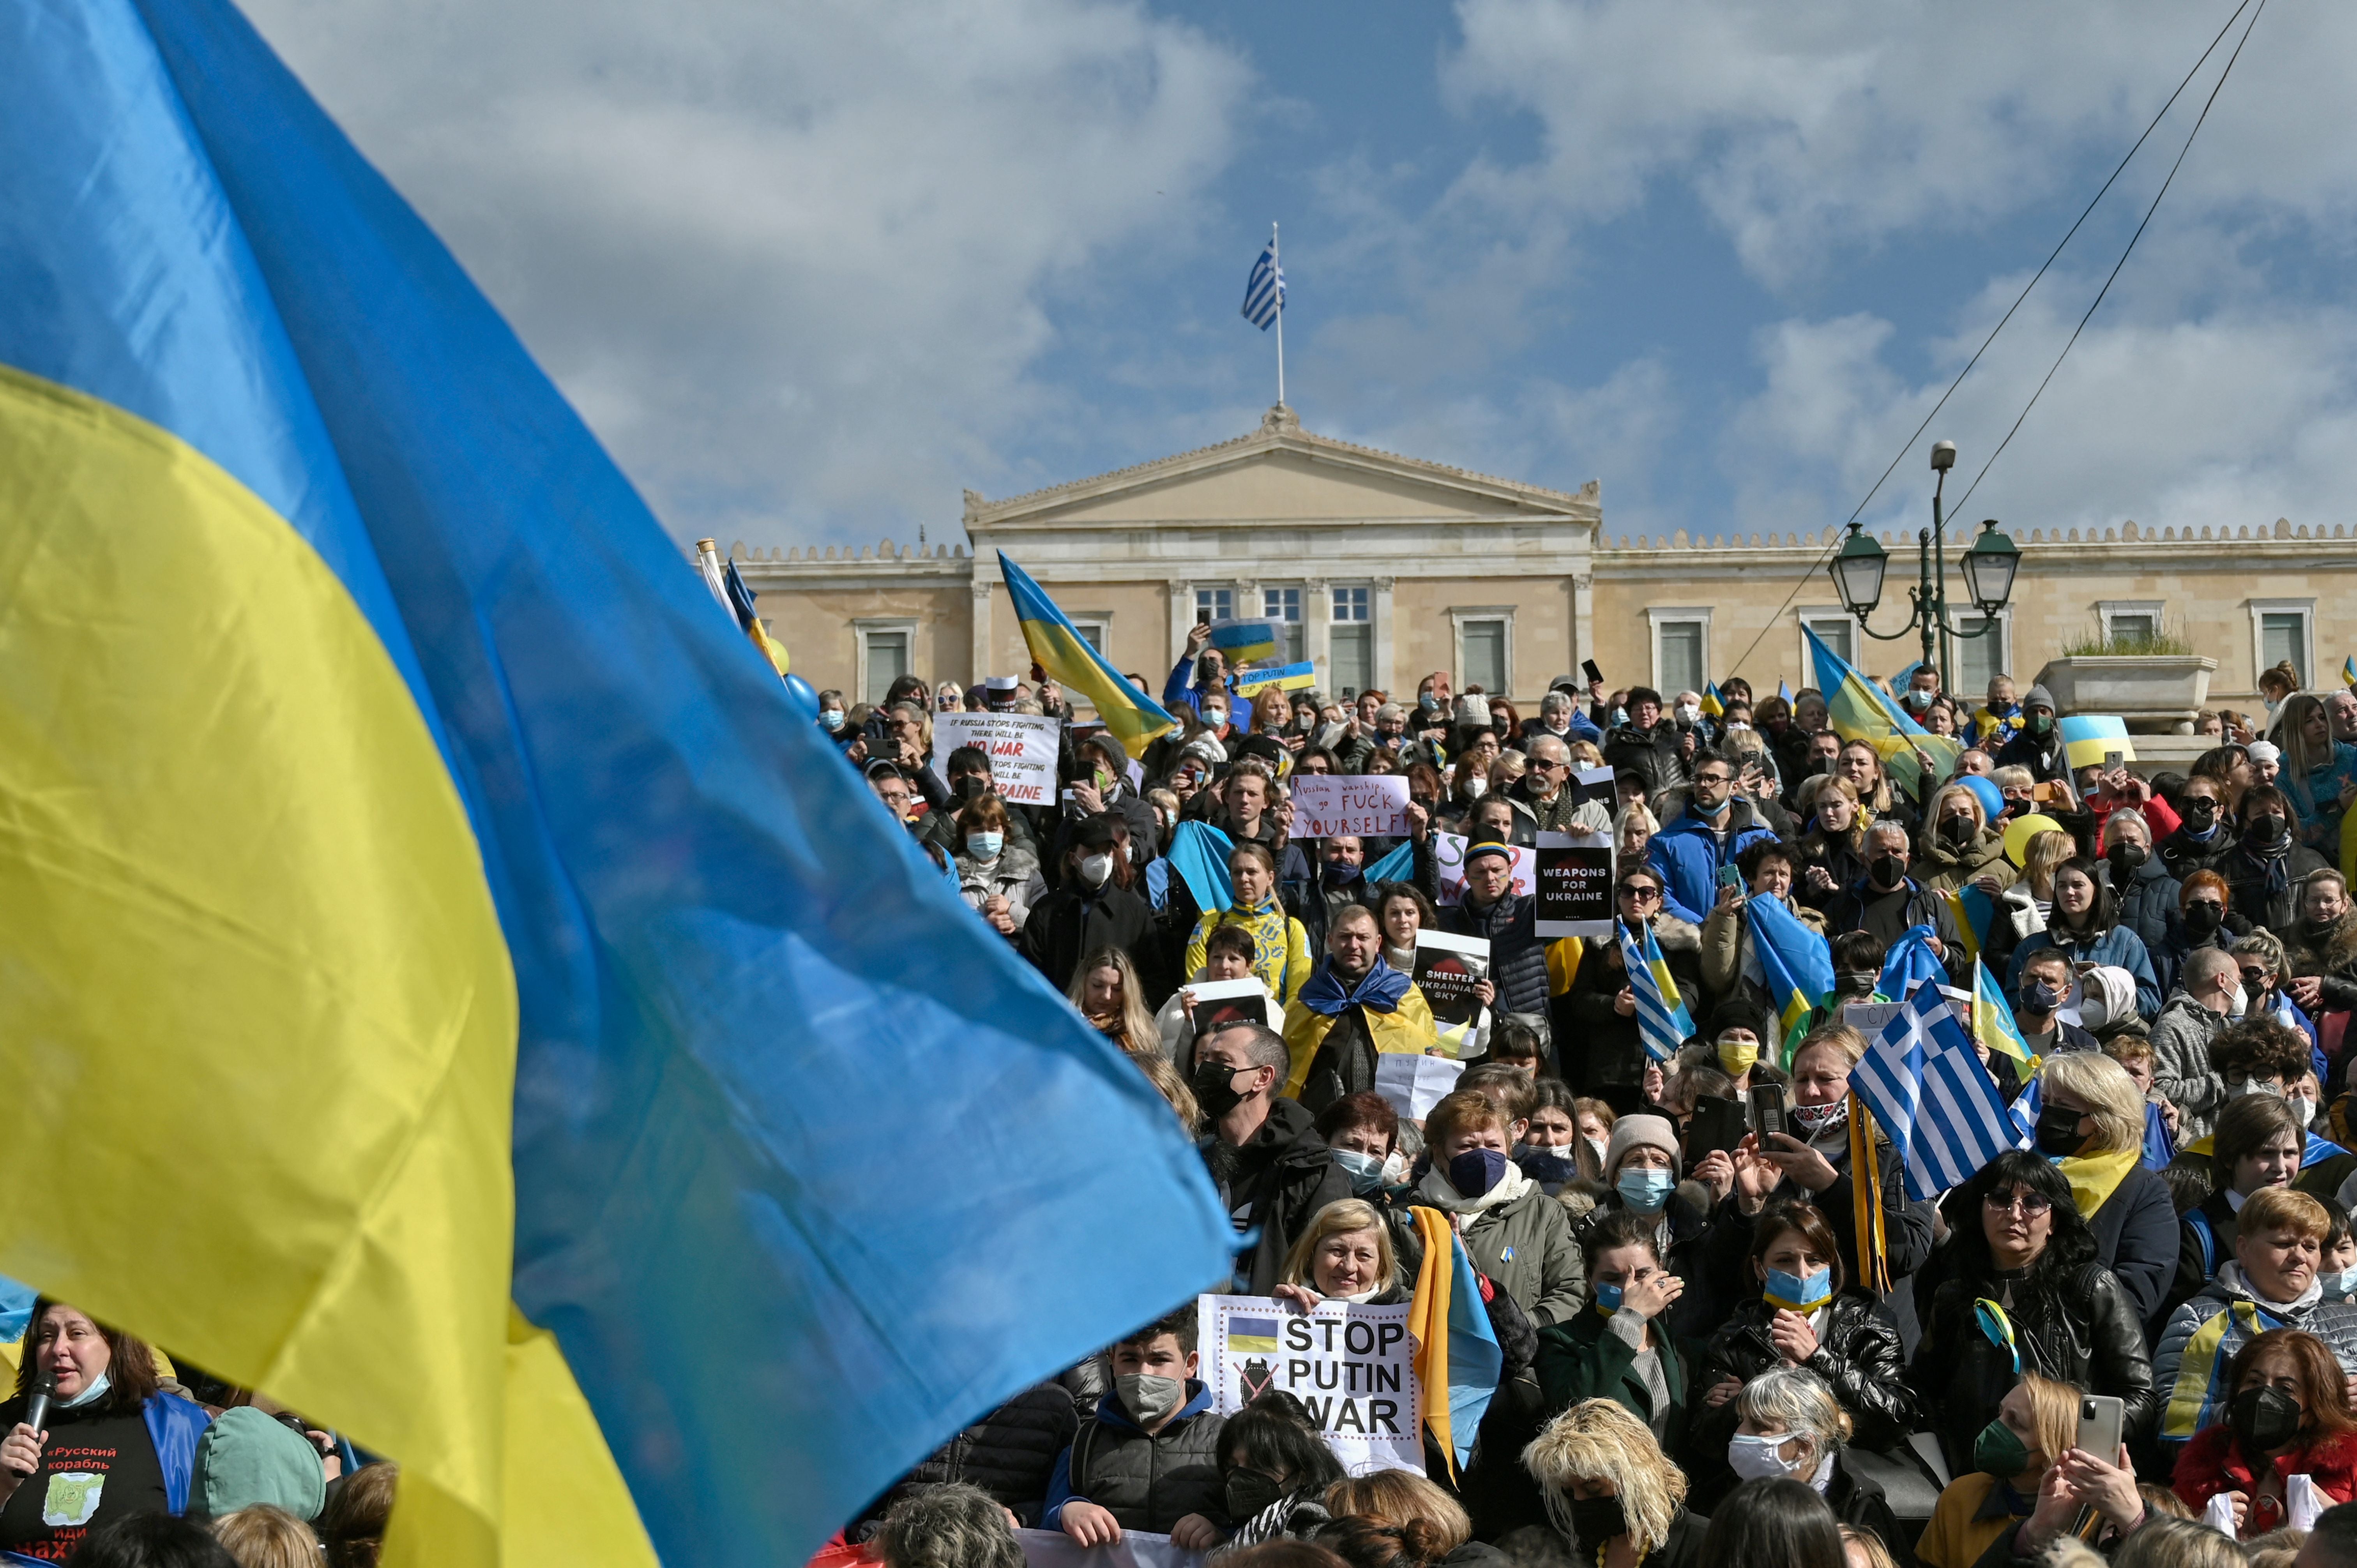 Ukrainians and supporters gather during a demonstration in front of the Greek parliament in Athens against the Russian invasion of Ukraine